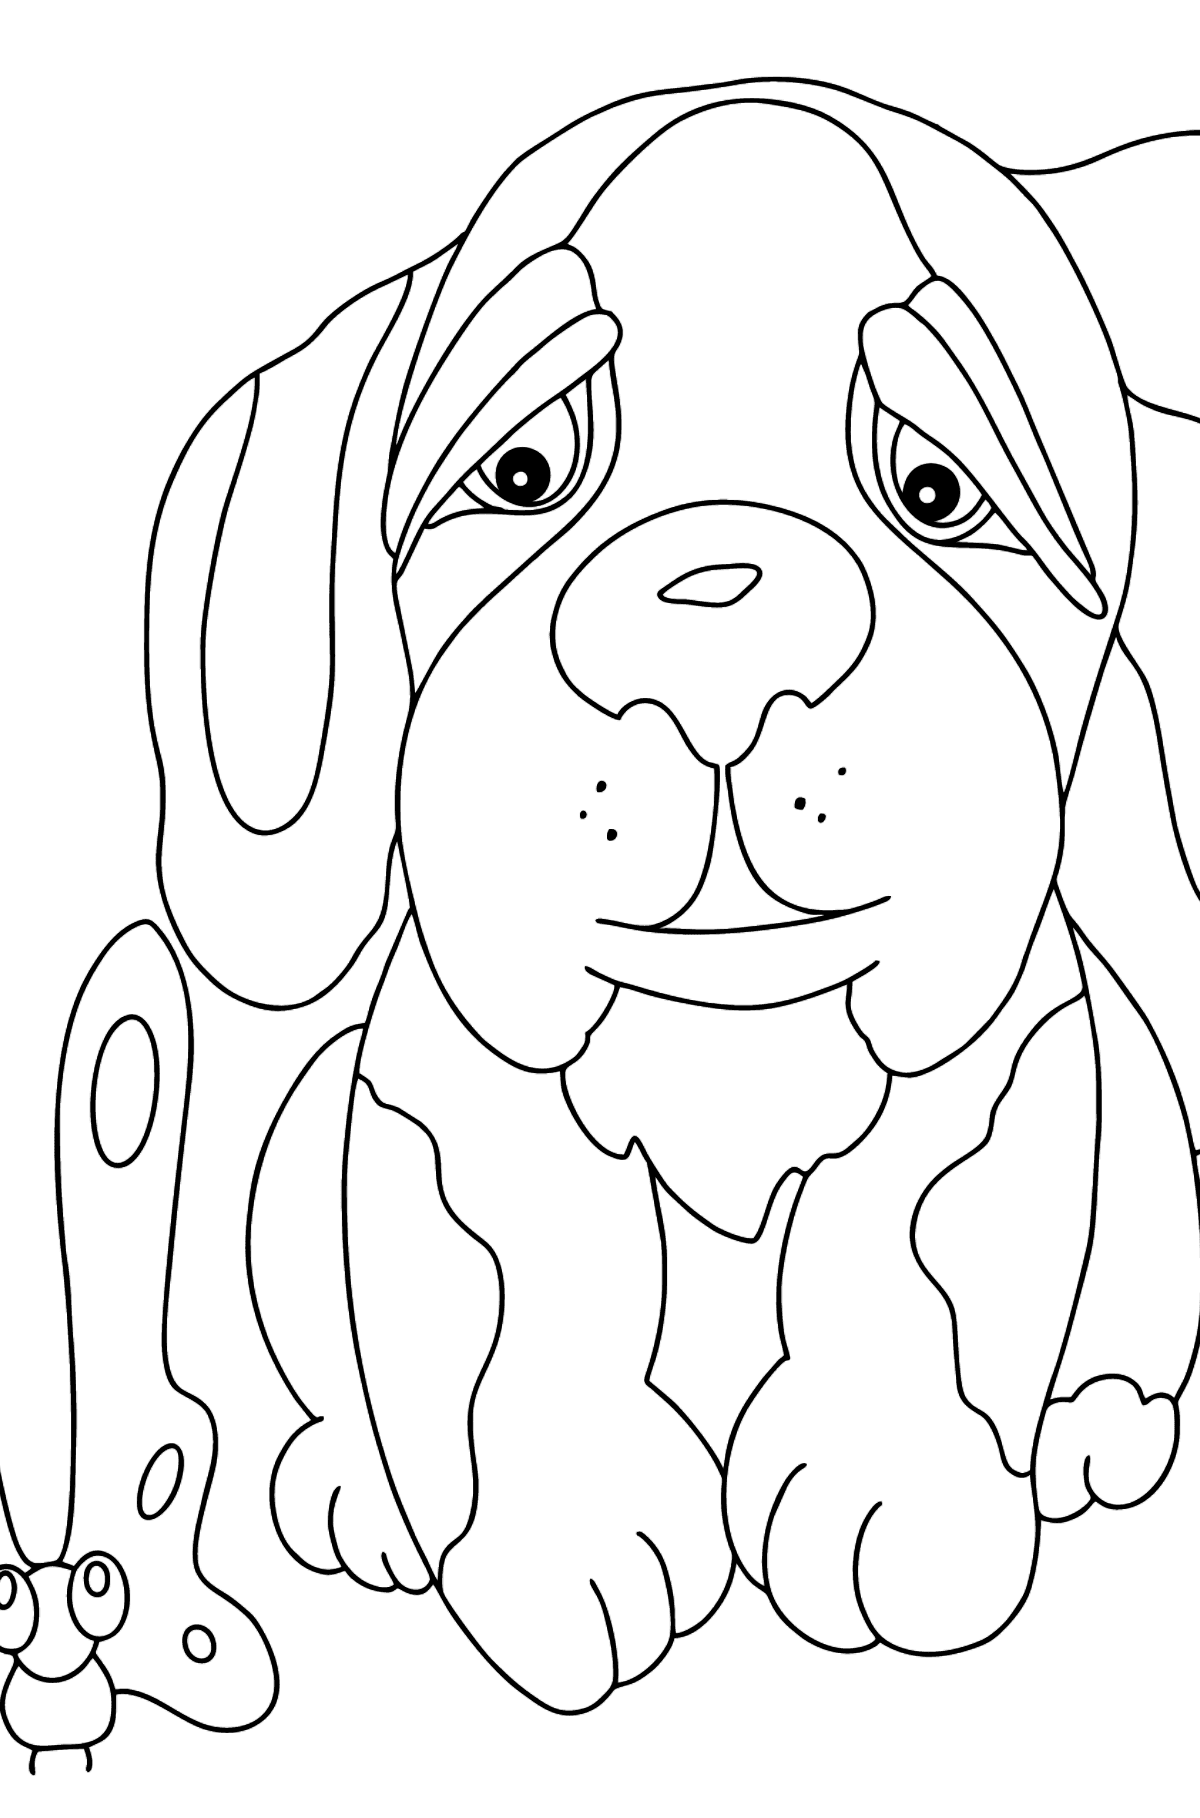 Coloring Page - A Dog is Watching a Butterfly - Coloring Pages for Kids